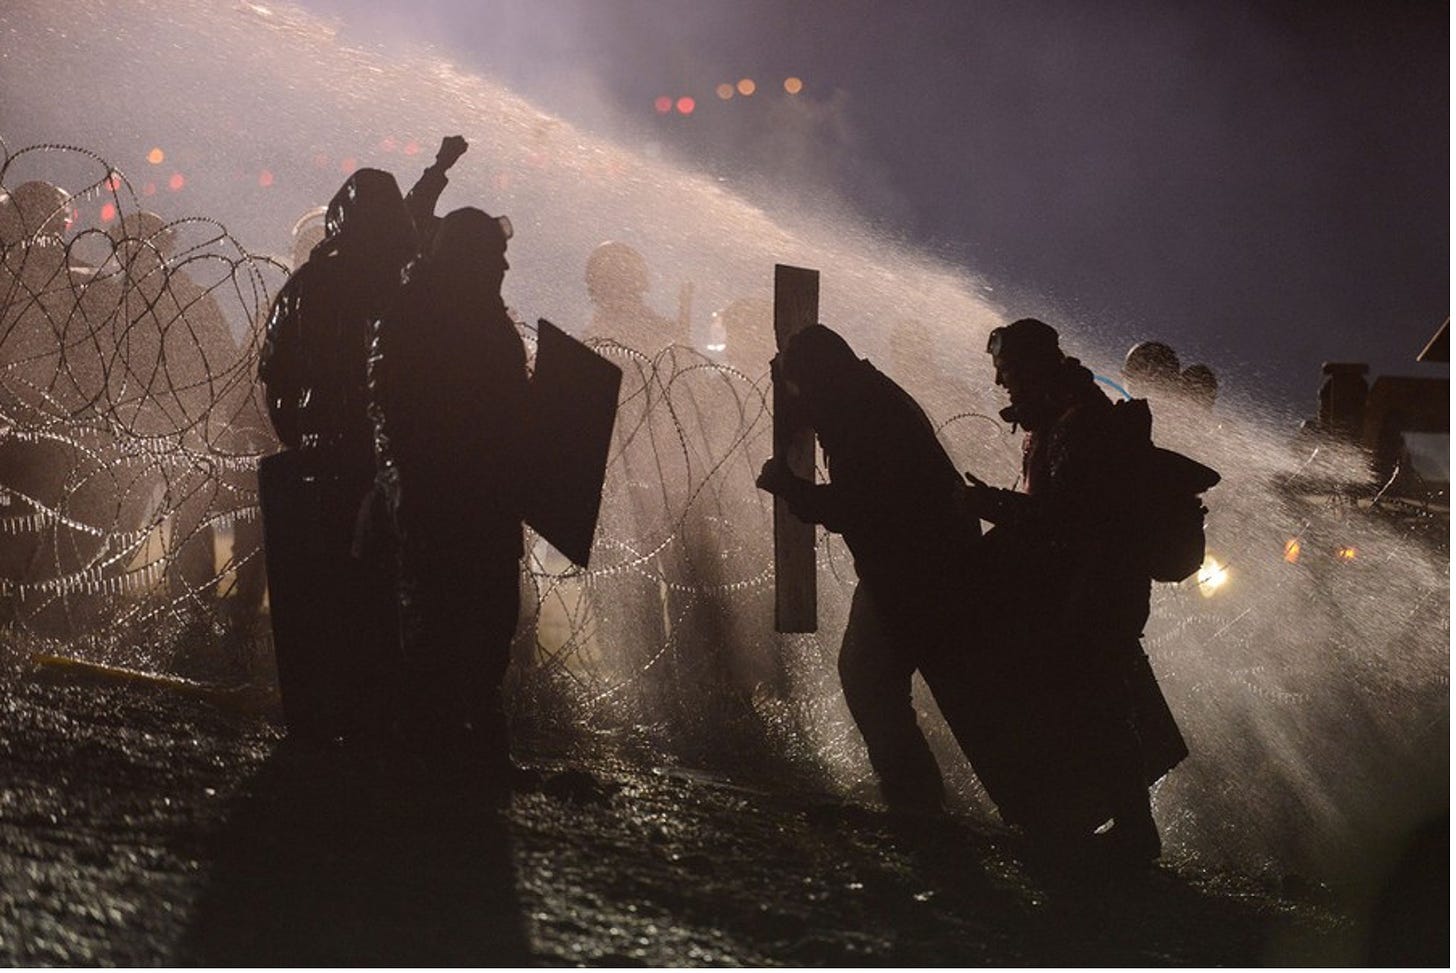 A picture of water protectors at Standing Rock being sprayed with water by police from across a barbed wire fence. The barbed wire has small icicles hanging from it.